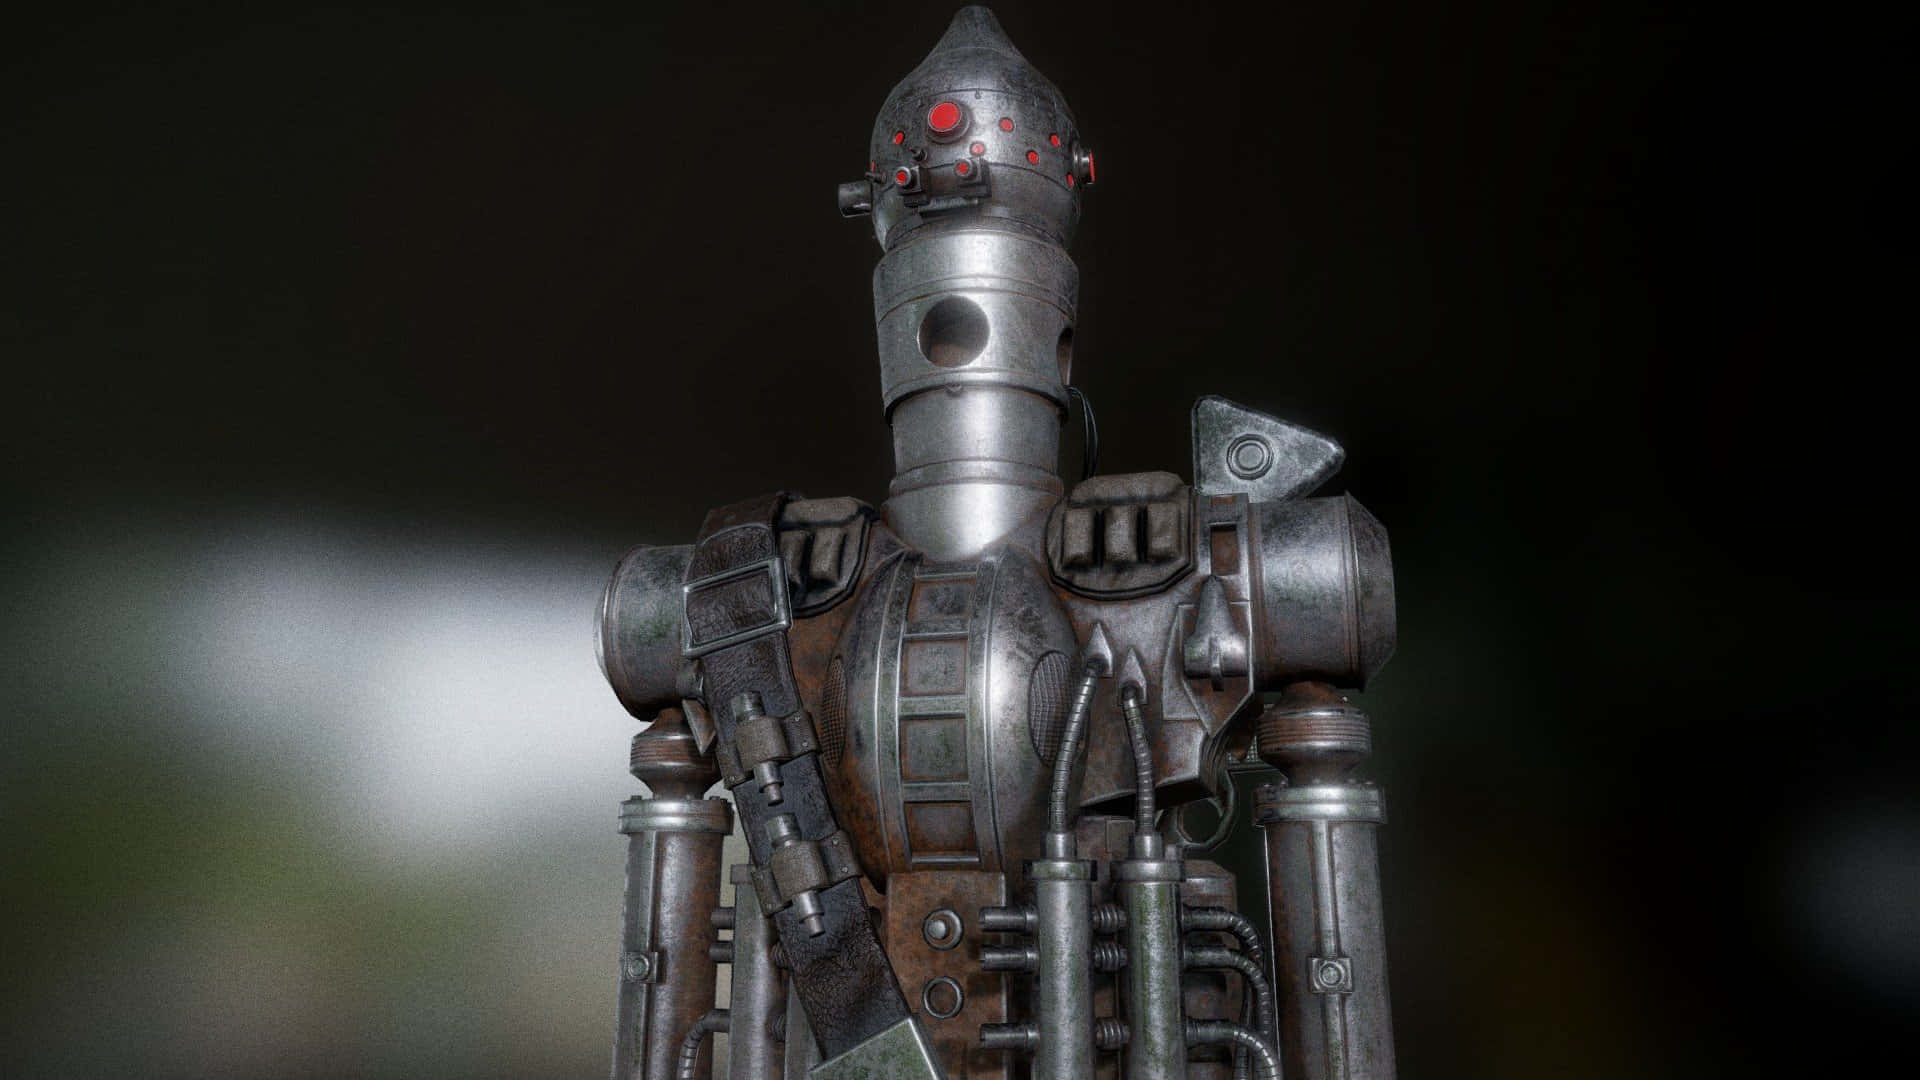 Prepare for battle with IG-88 Wallpaper